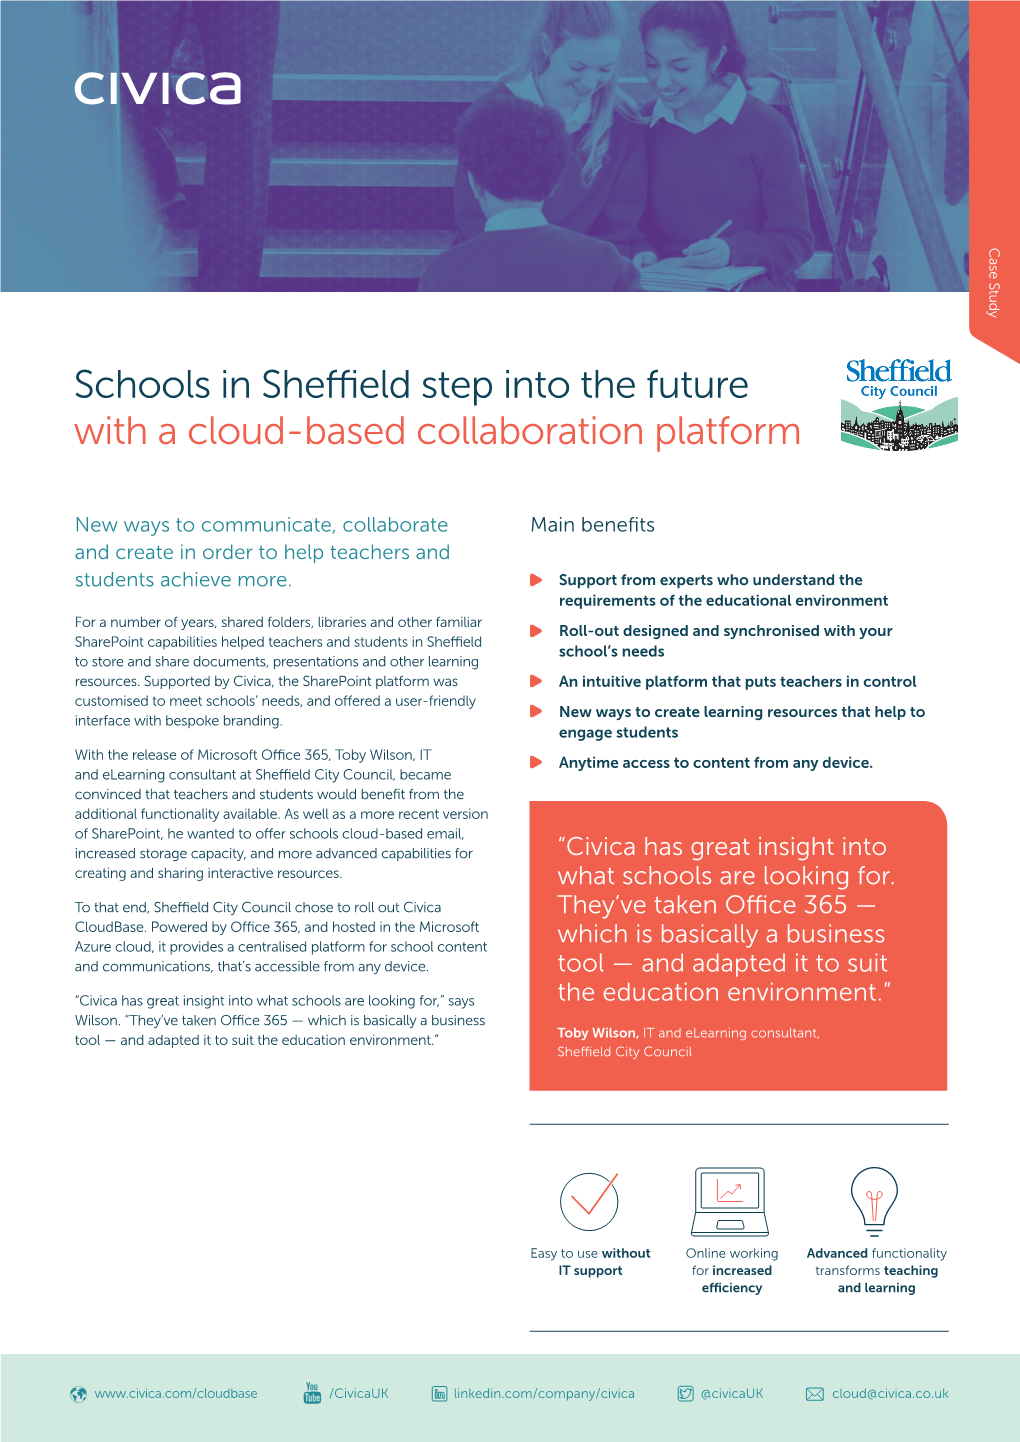 Schools in Sheffield Step Into the Future with a Cloud-Based Collaboration Platform